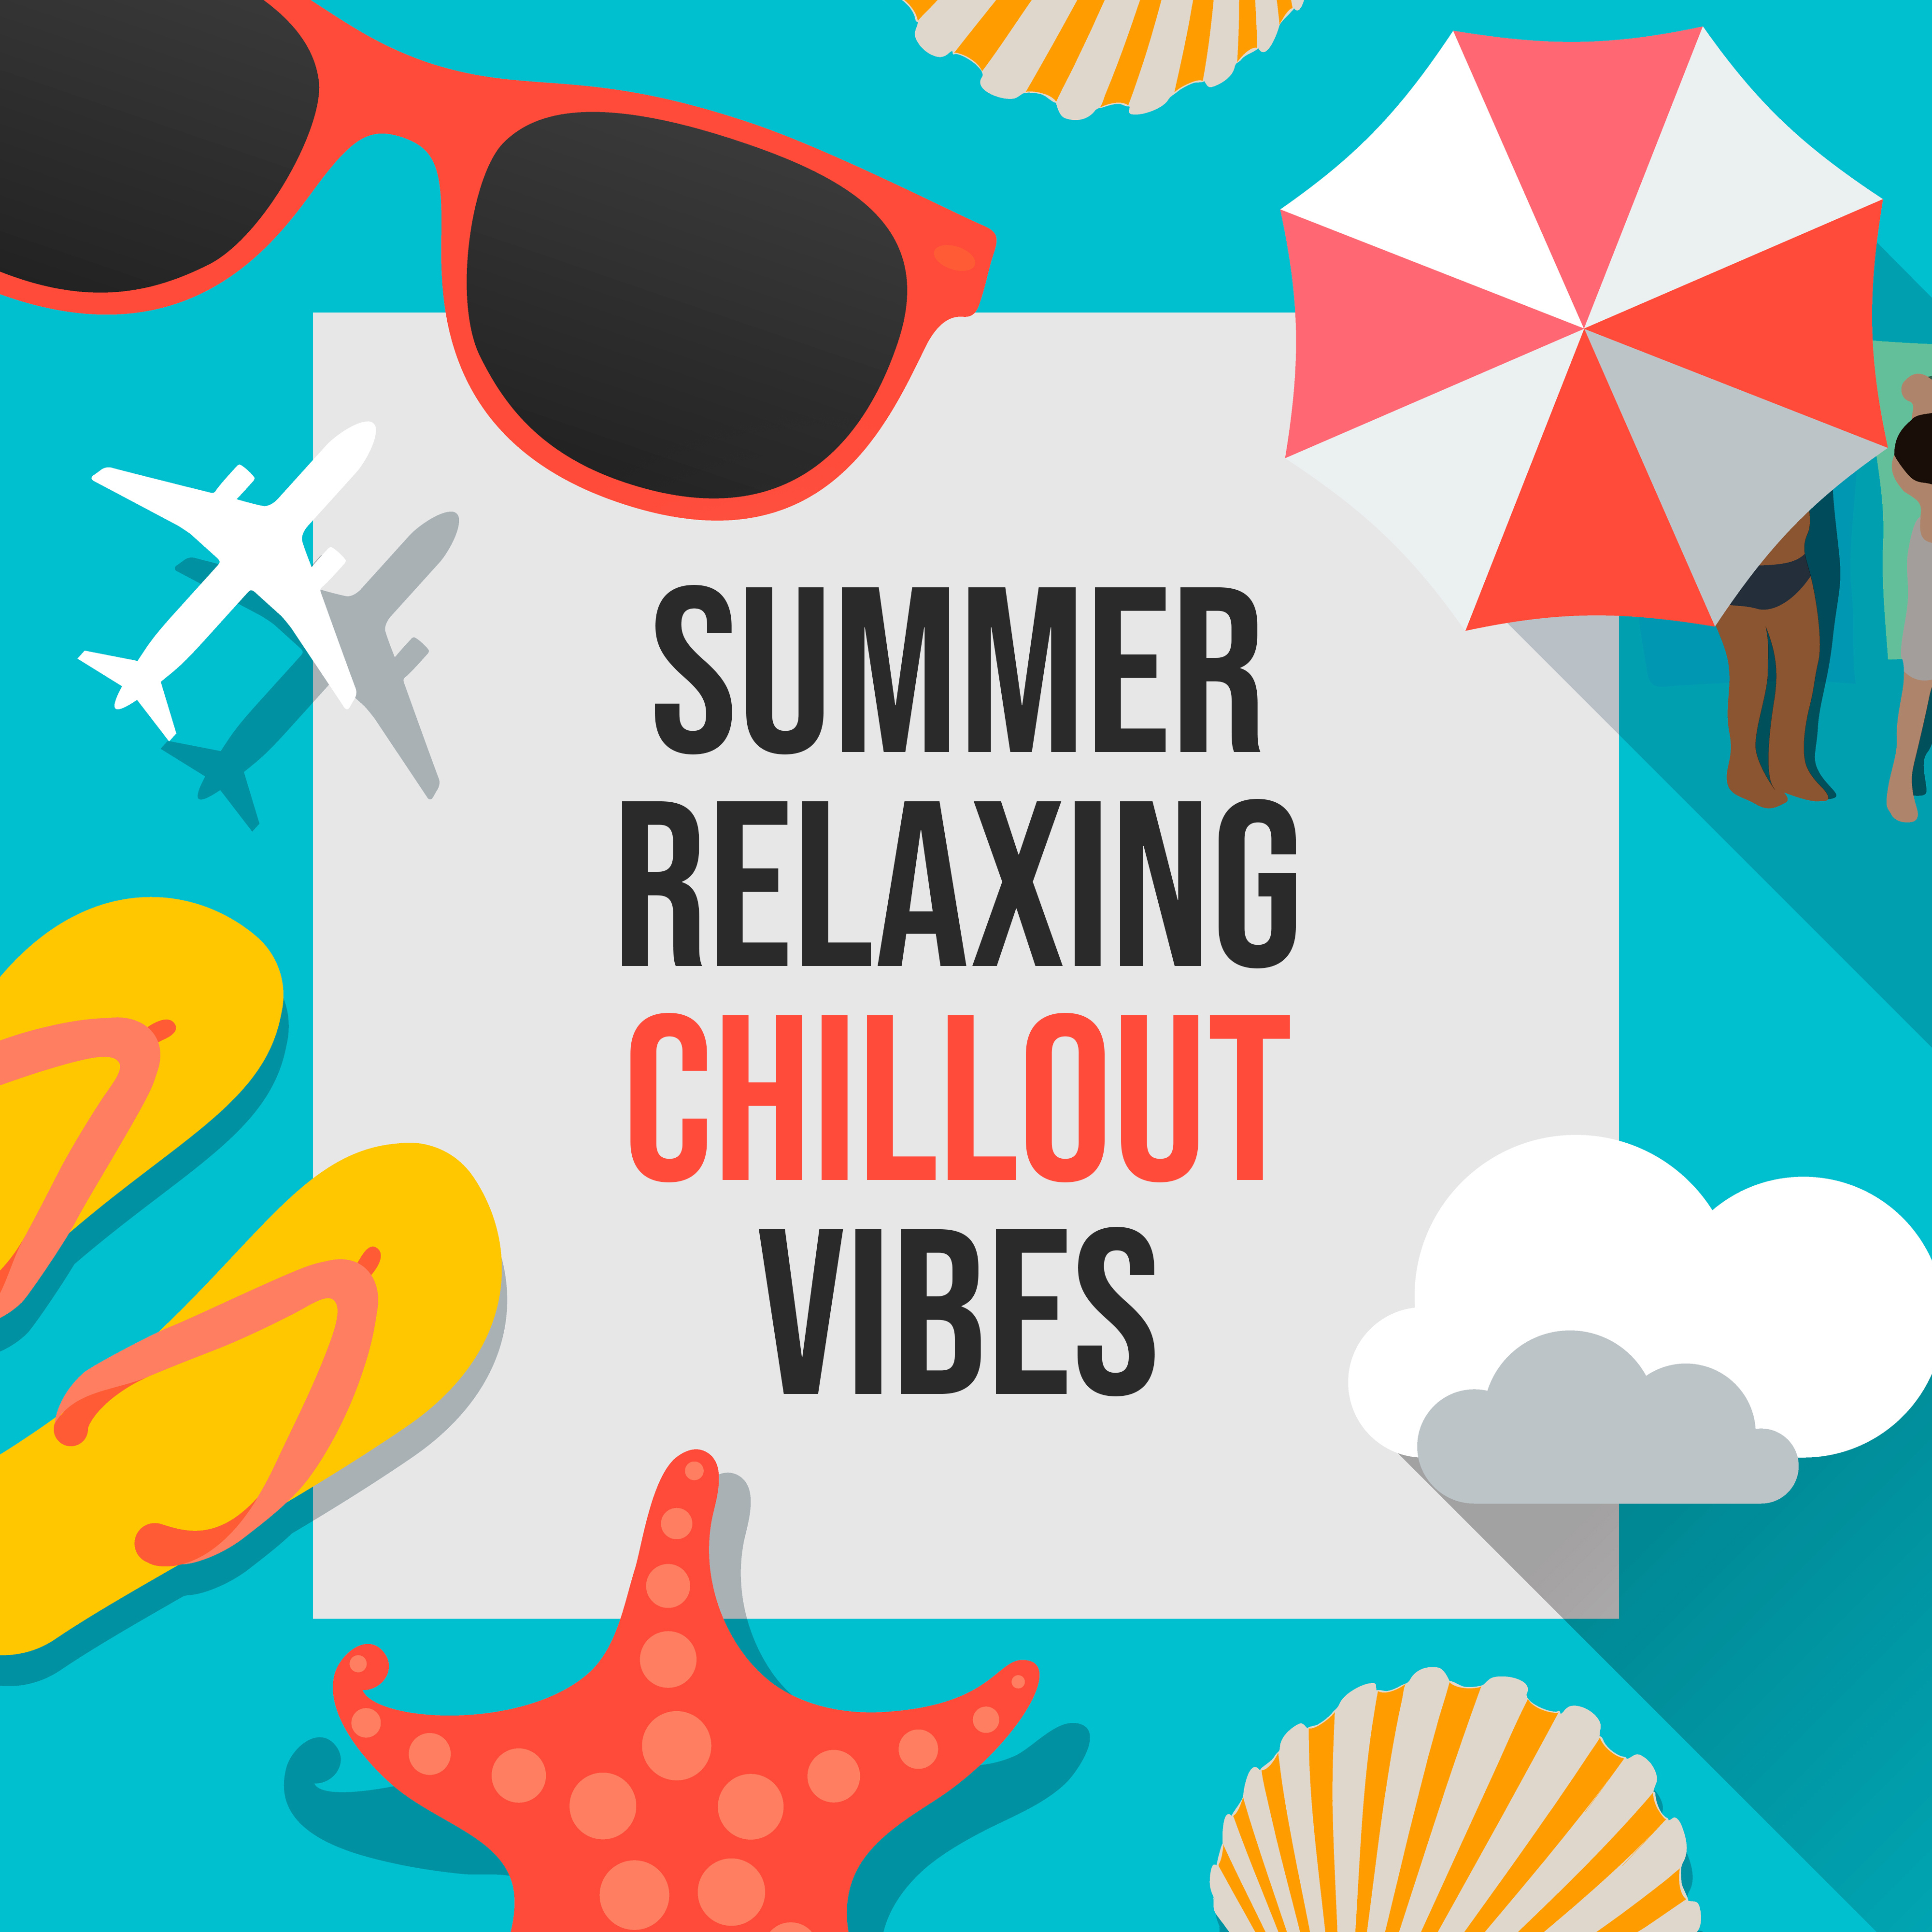 Summer Relaxing Chillout Vibes